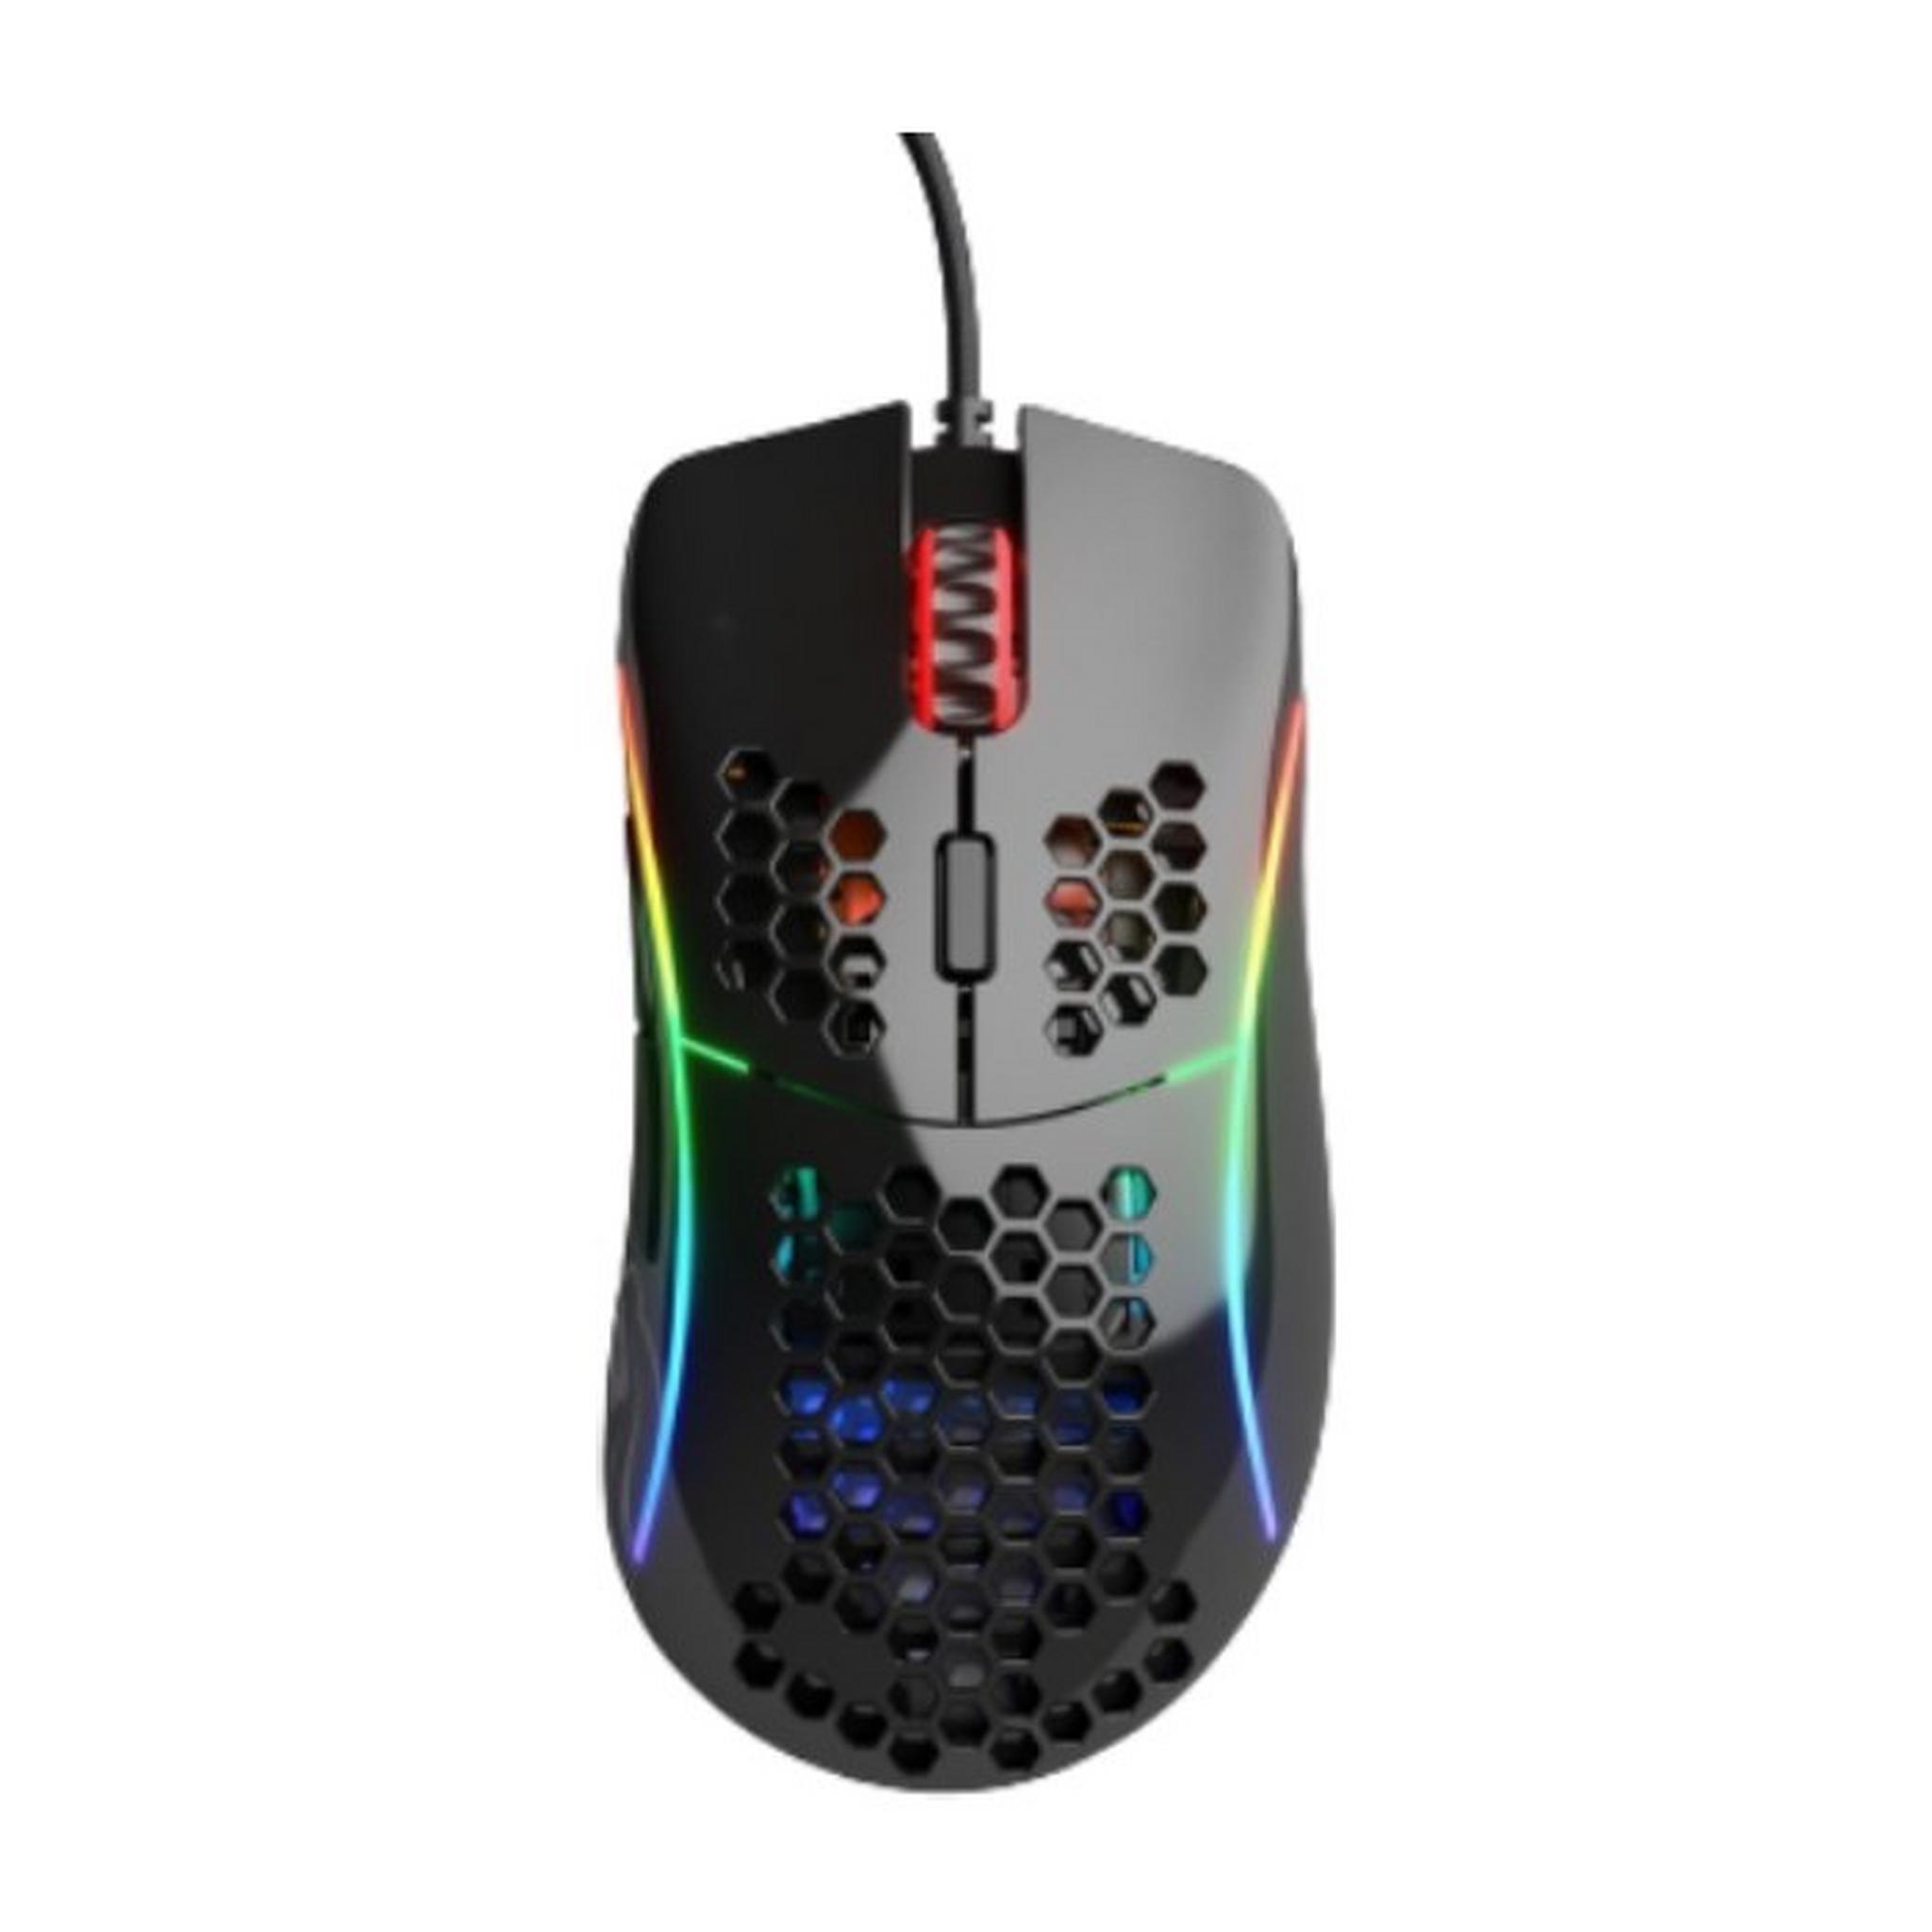 Glorious Model D Gaming Mouse - Glossy Black